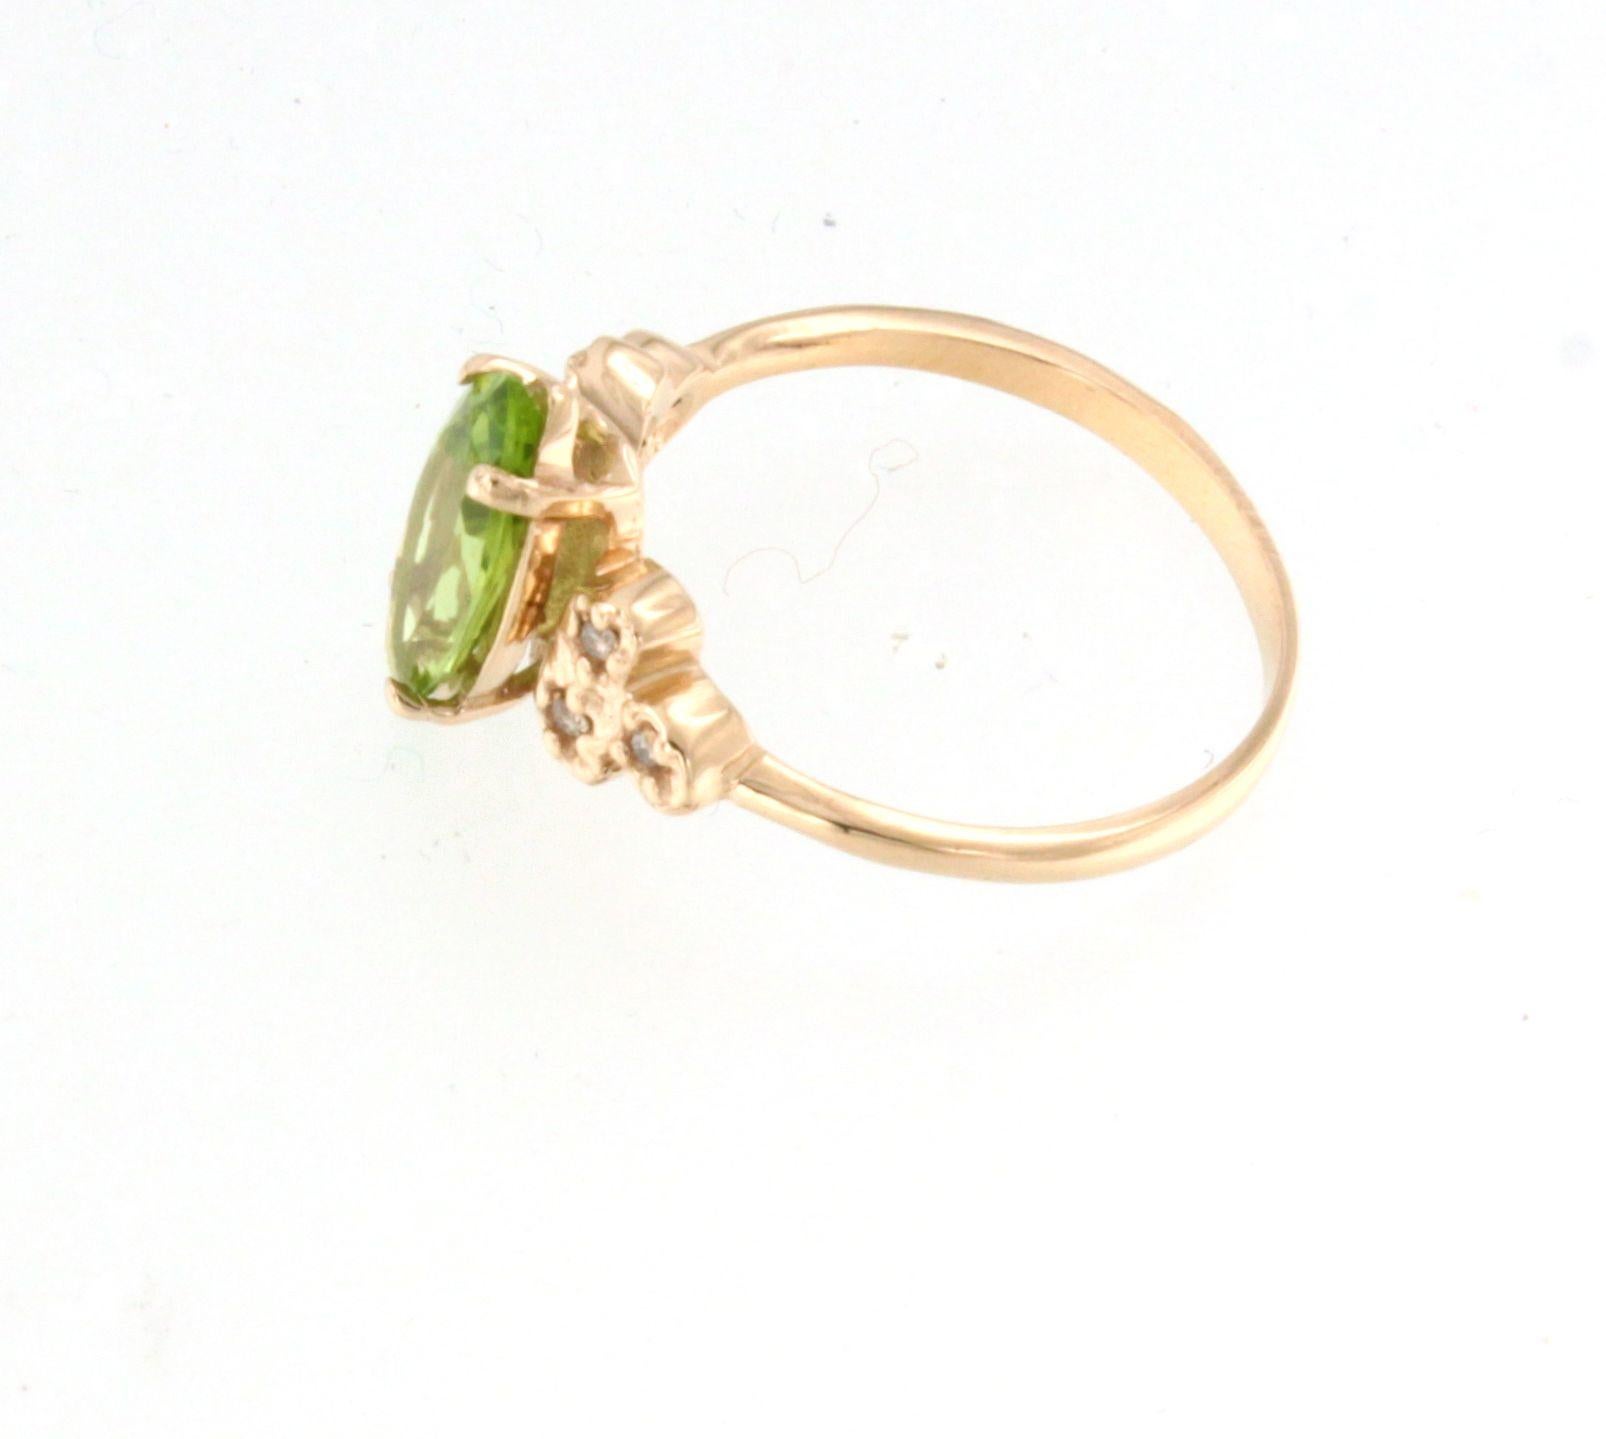 Cocktail ring in rose gold with amazing Peridot stone (marquise cut, size: mm) and white diamonds cts 0.05 . The designer Gisella has a refined taste, her jewels stand out from others.
Designed and handmade in Italy by Stanoppi Jewellery since